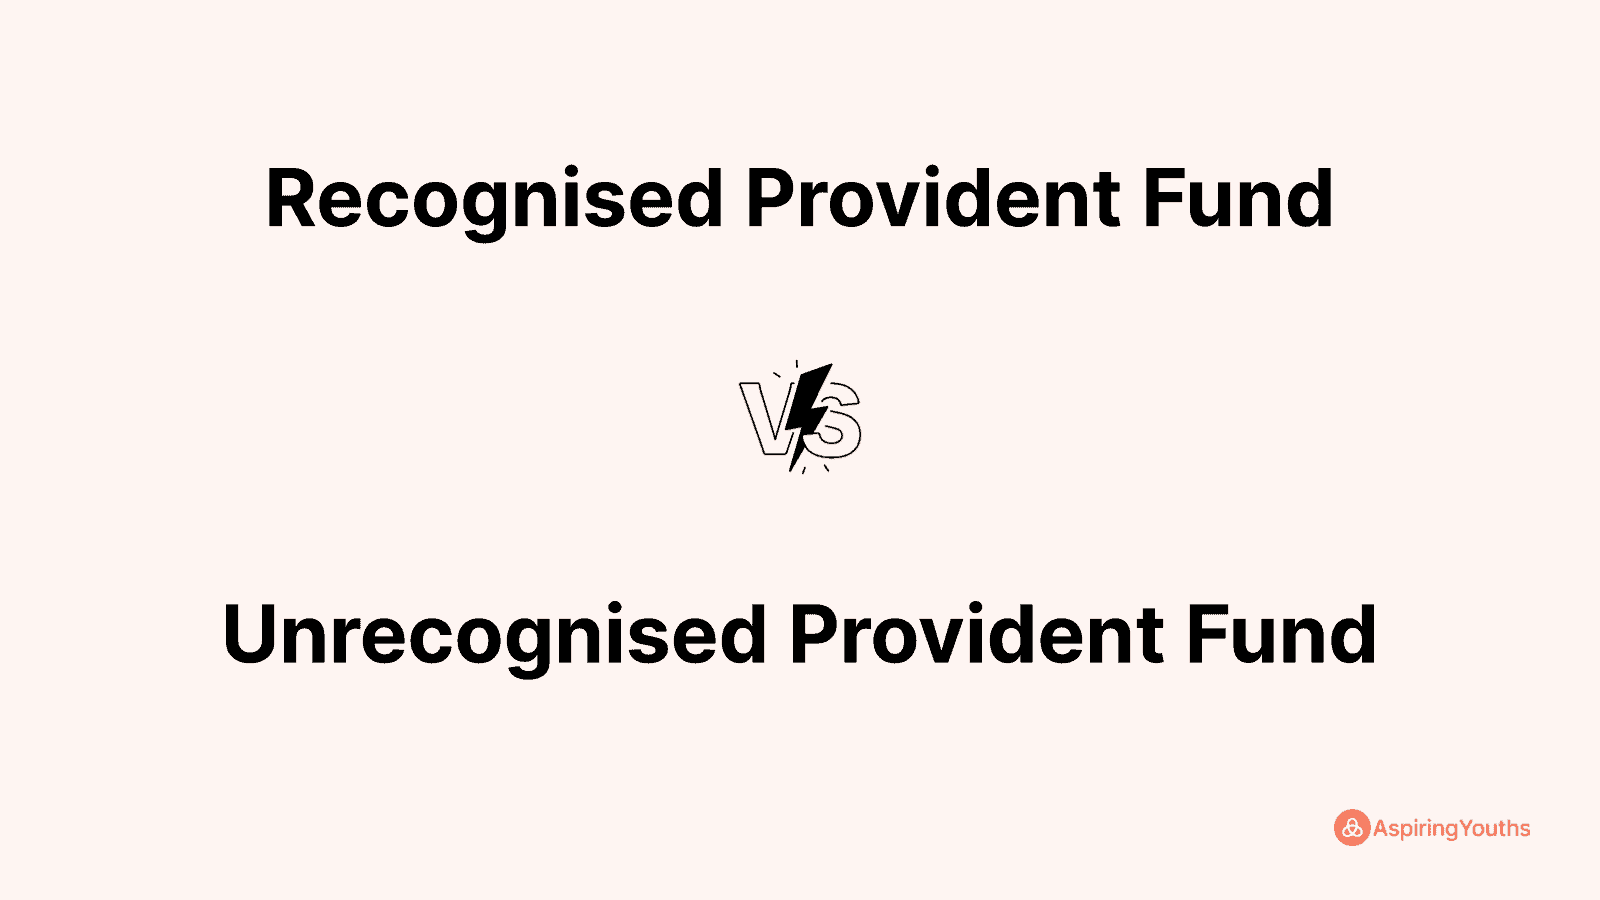 Recognised Provident Fund vs Unrecognised Provident Fund